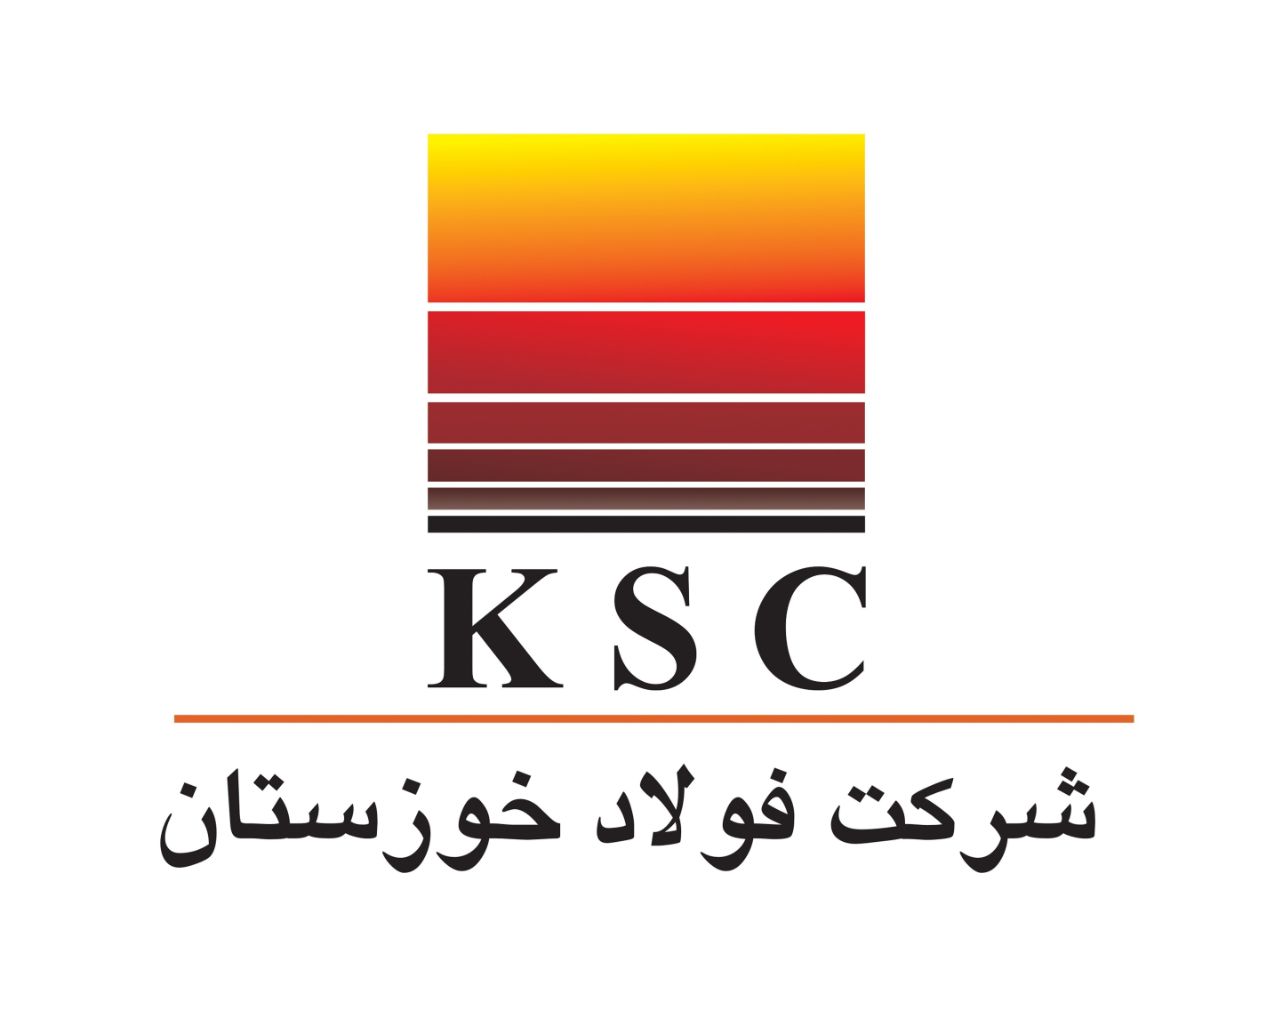 KSC is the top steel company in Iran